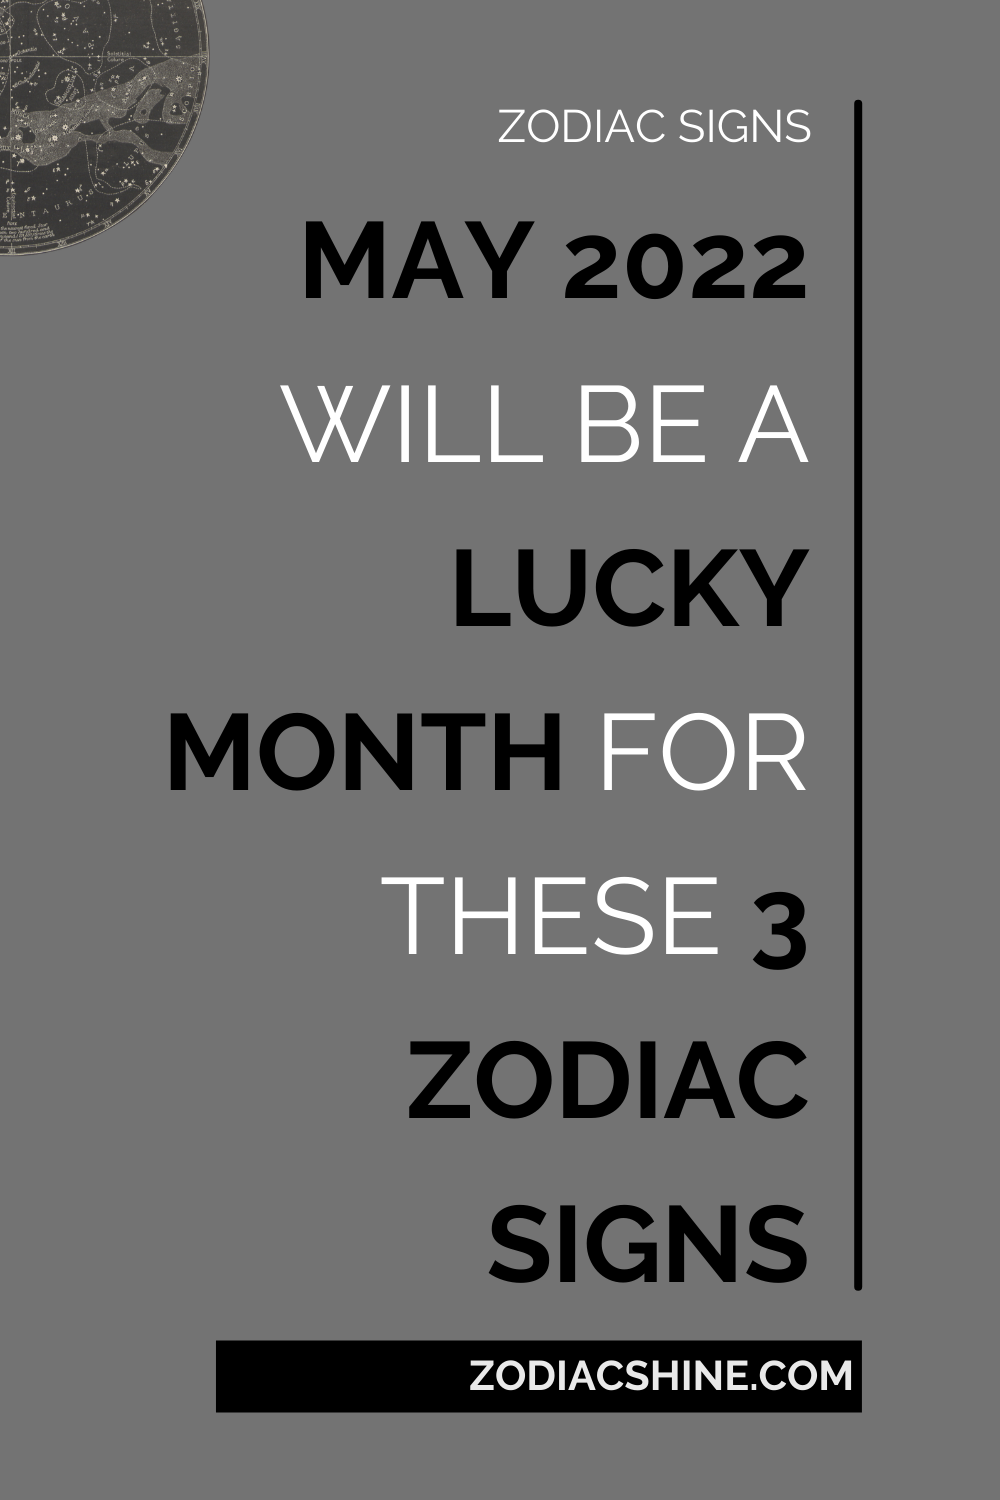 May 2022 Will Be A Lucky Month For These 3 Zodiac Signs